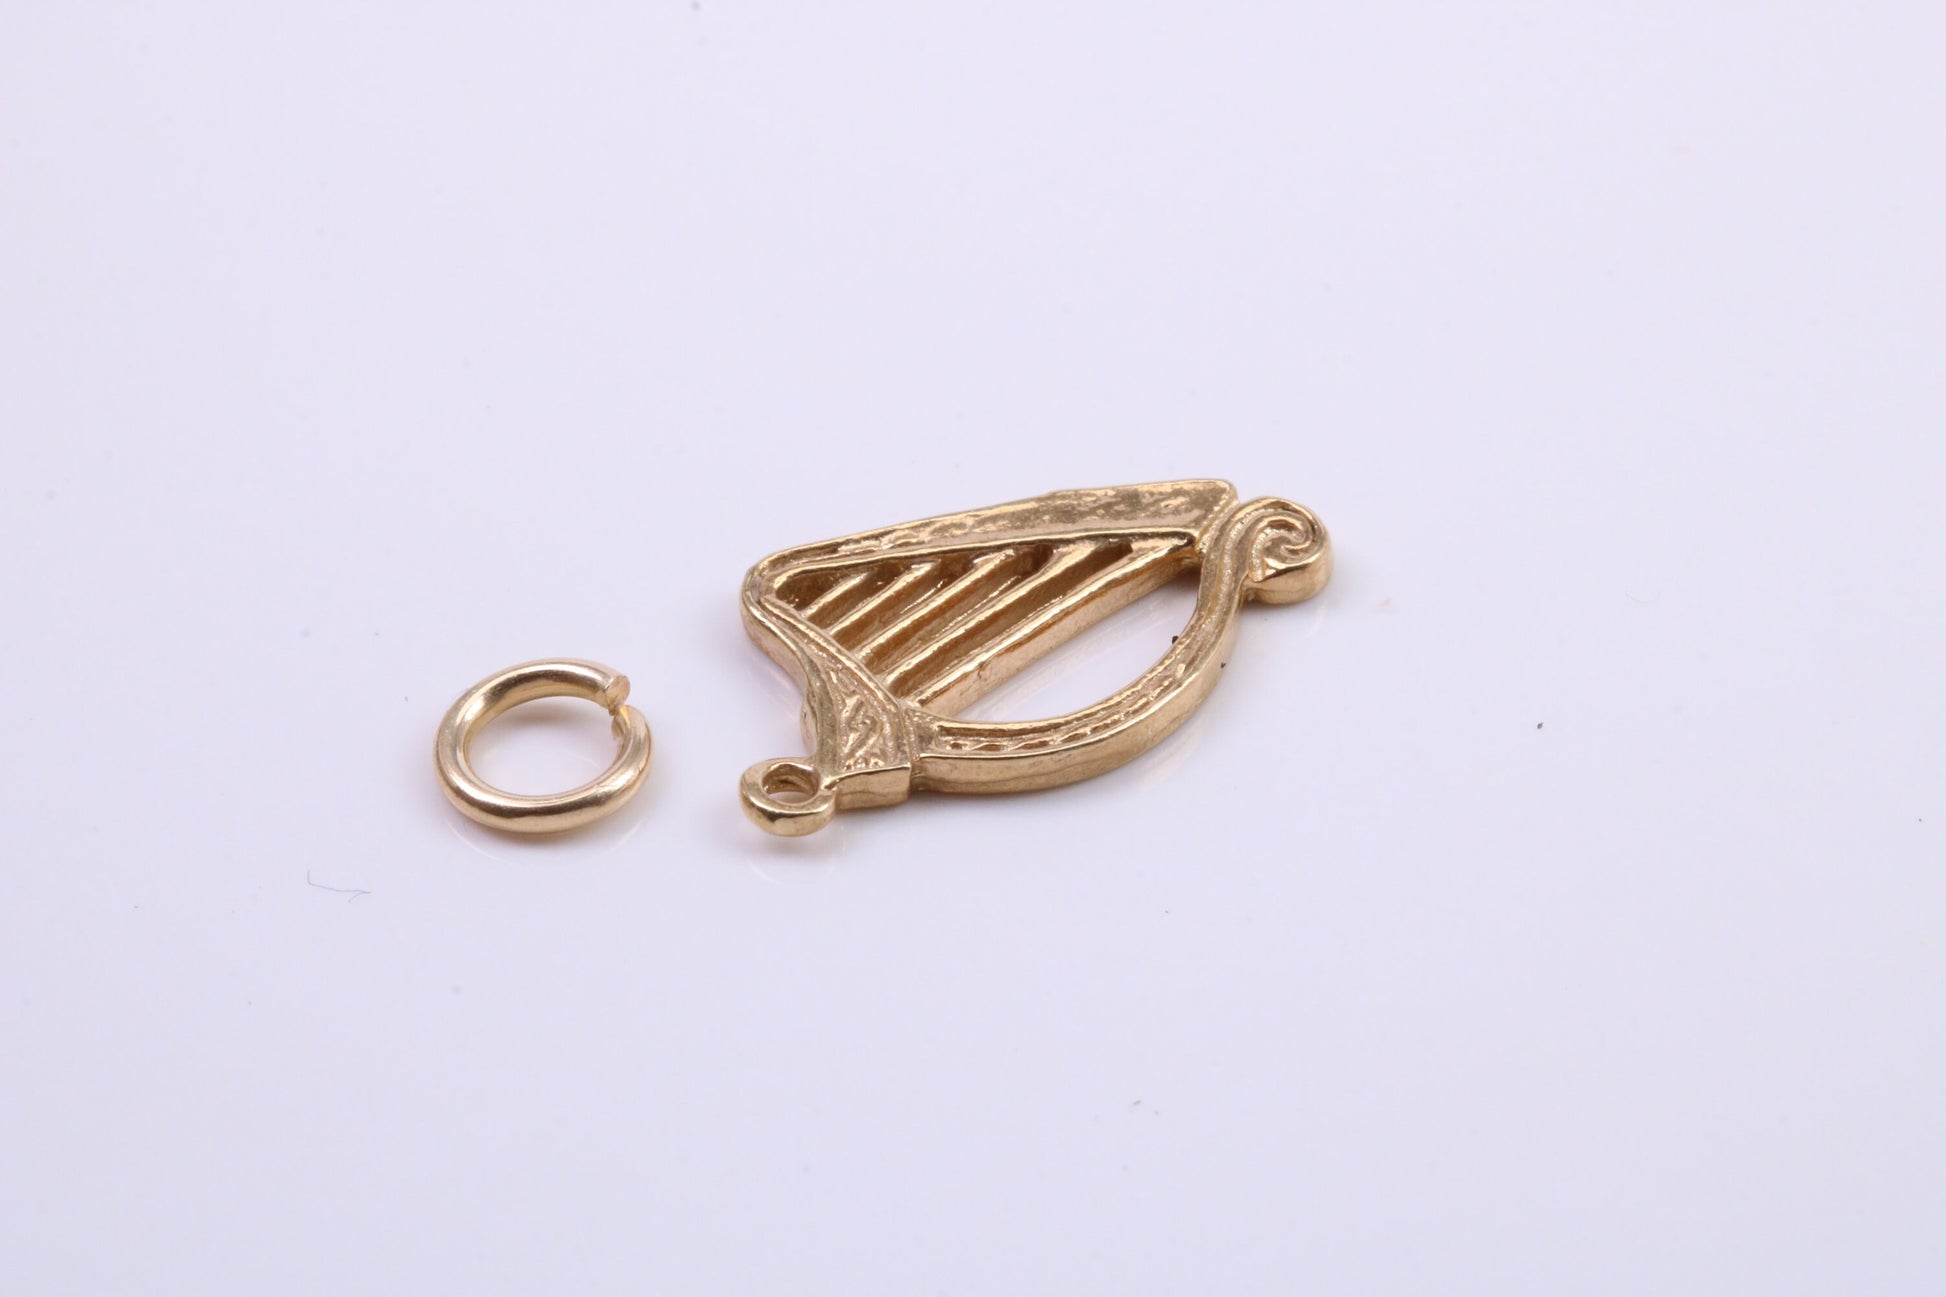 Harp Charm, Traditional Charm, Made from Solid 9ct Yellow Gold, British Hallmarked, Complete with Attachment Link